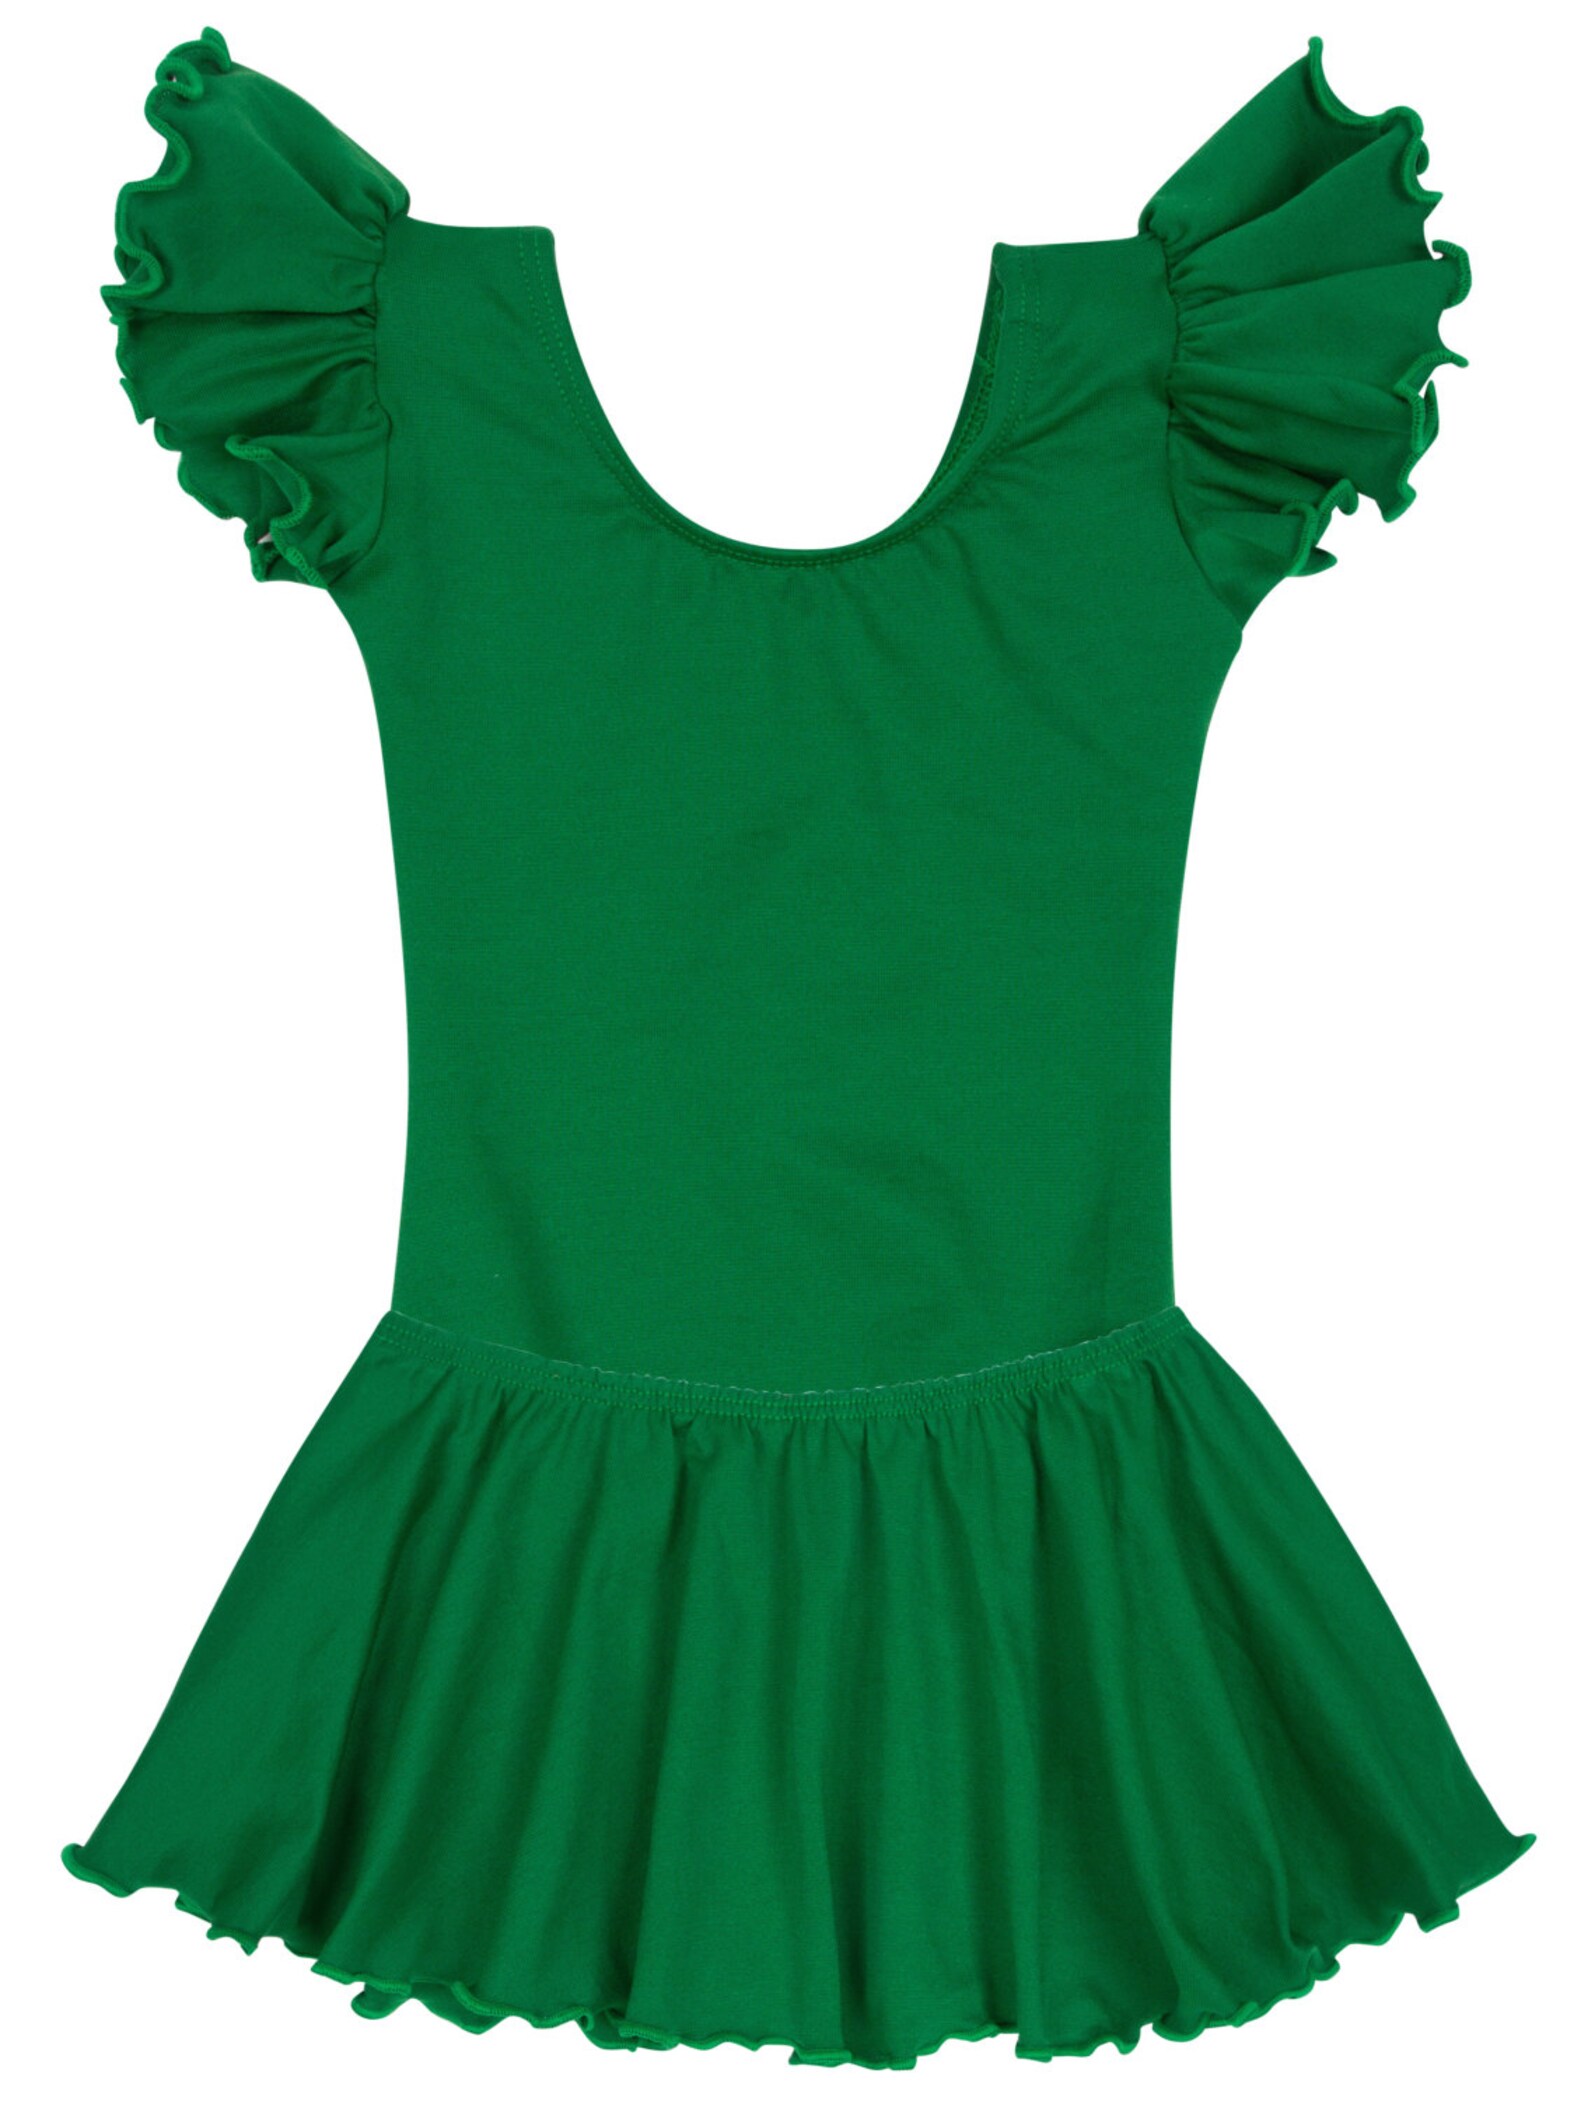 Green Flutter / Ruffle Short Sleeve Leotard for Child and | Etsy